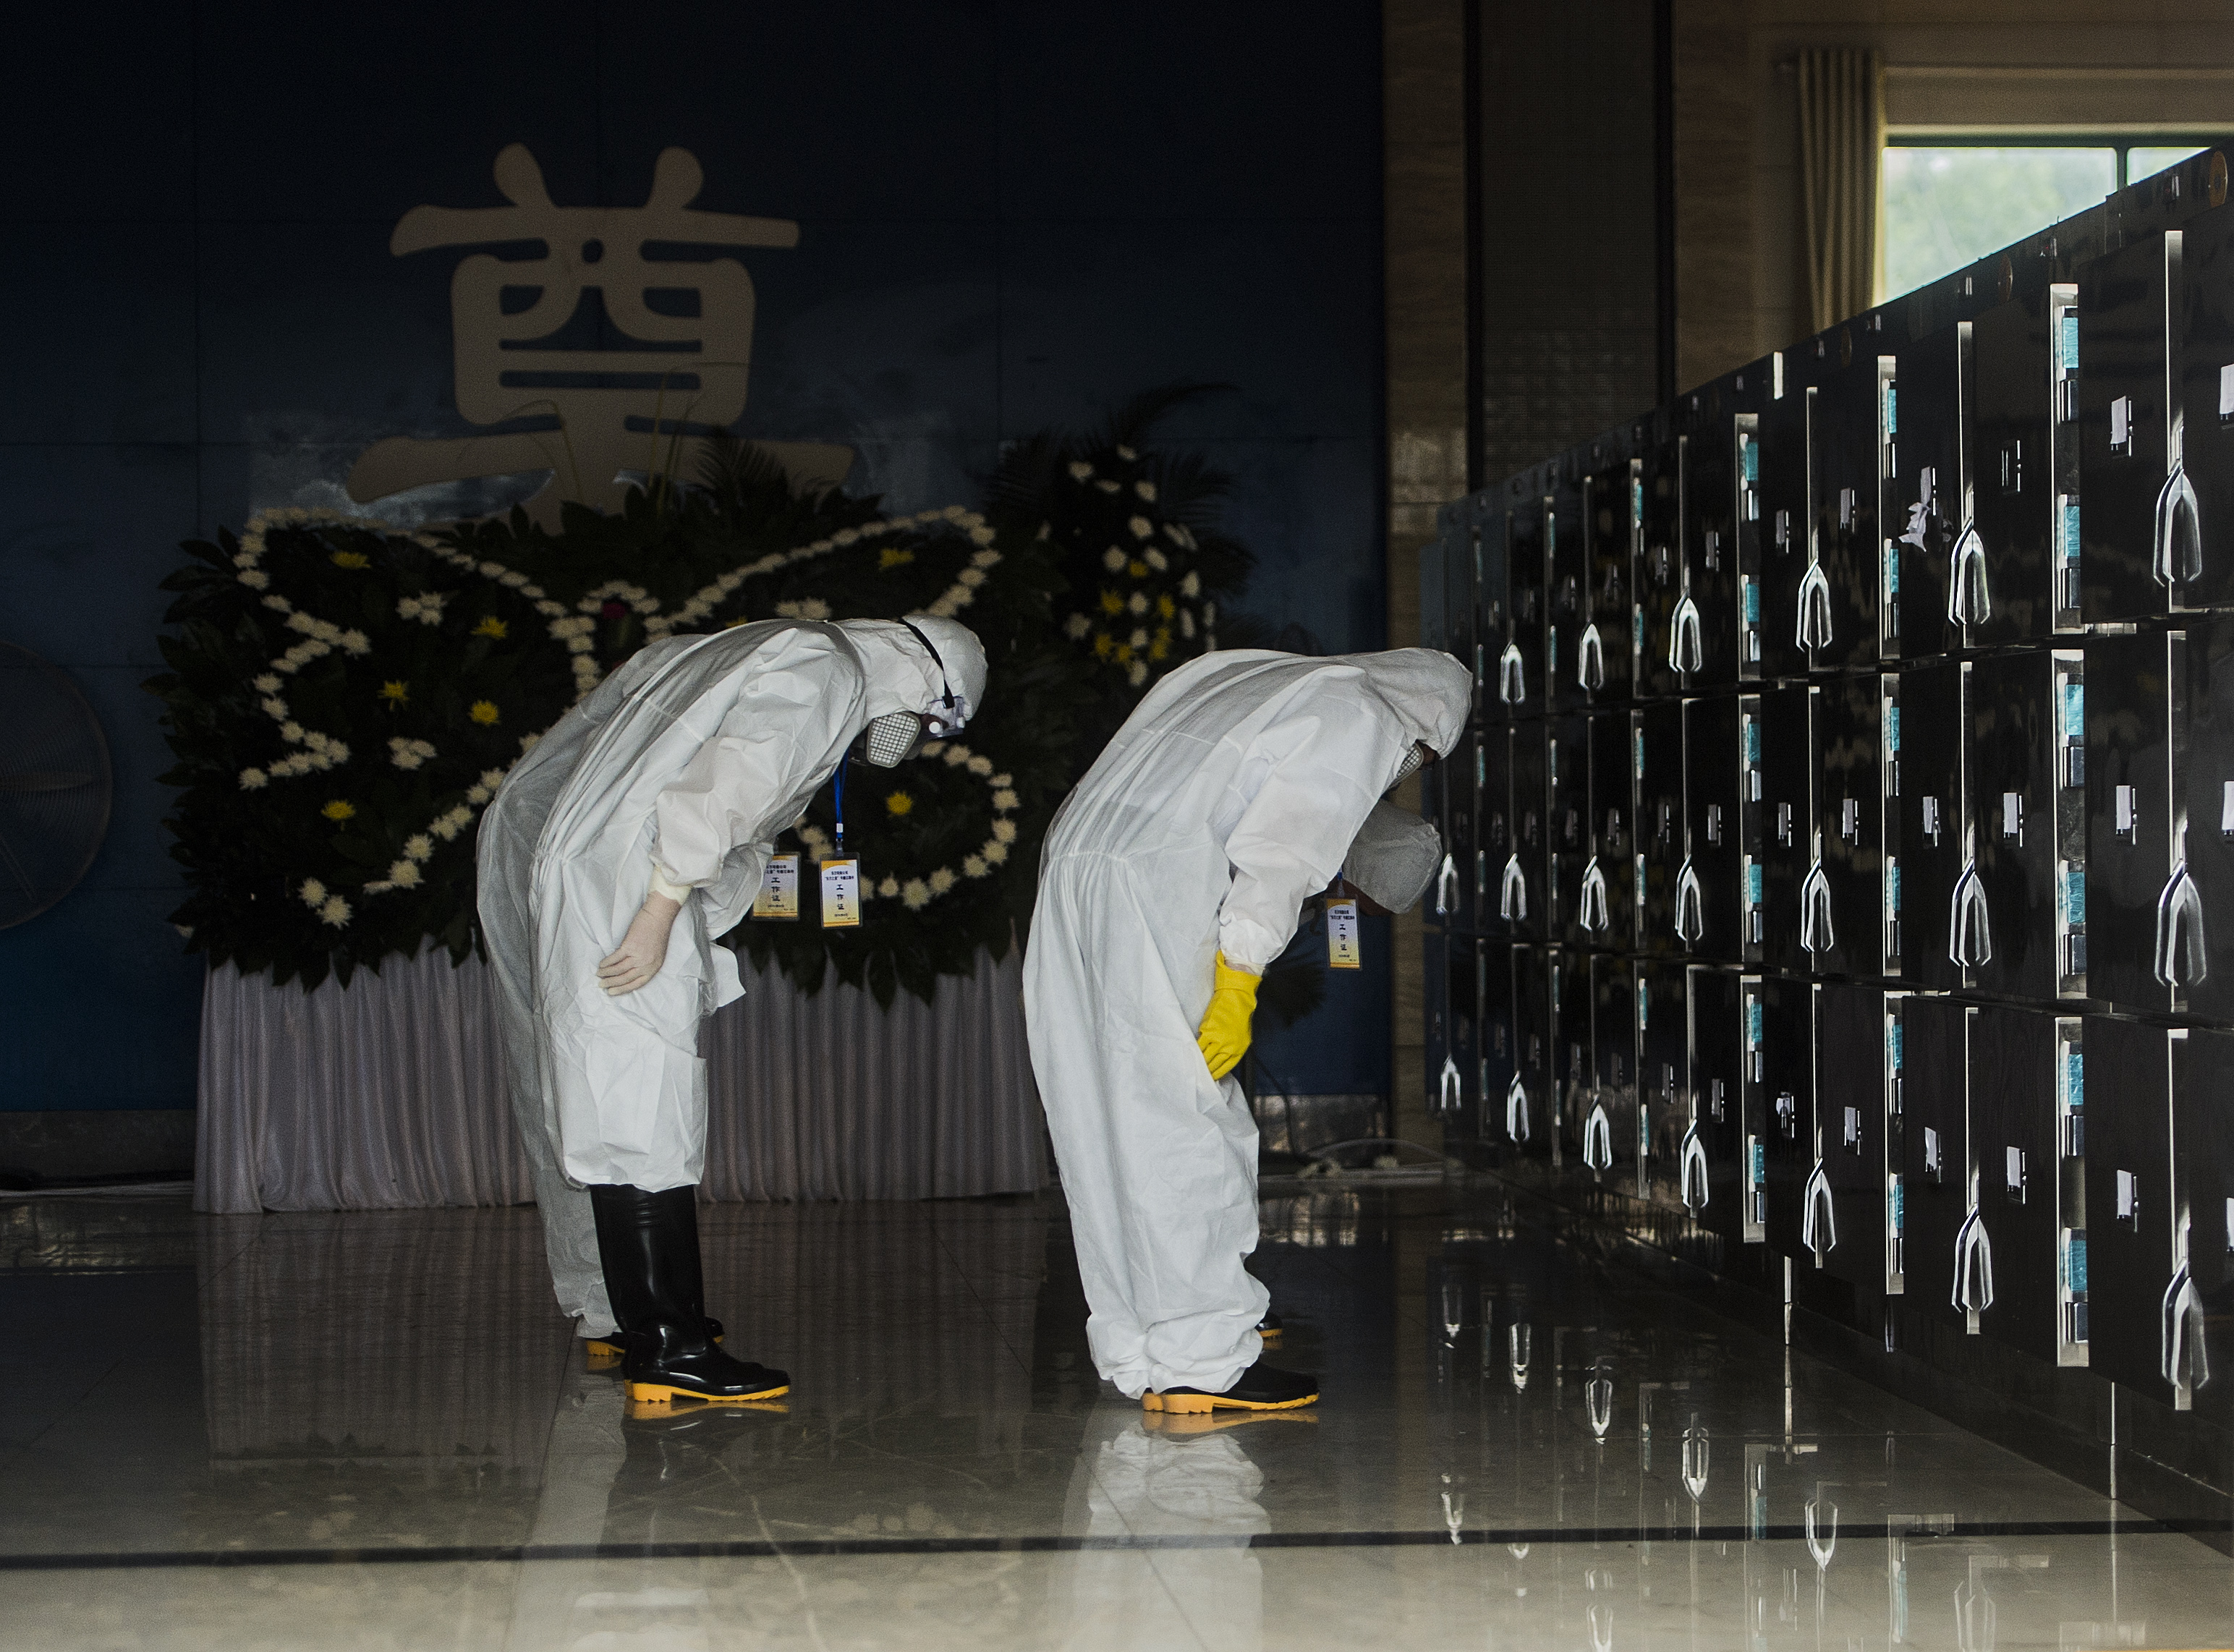 Rescuers yesterday confirmed that only 12 people survived the Yangtze cruise ship tragedy, not 14, a figure previously reported. Photo: Xinhua